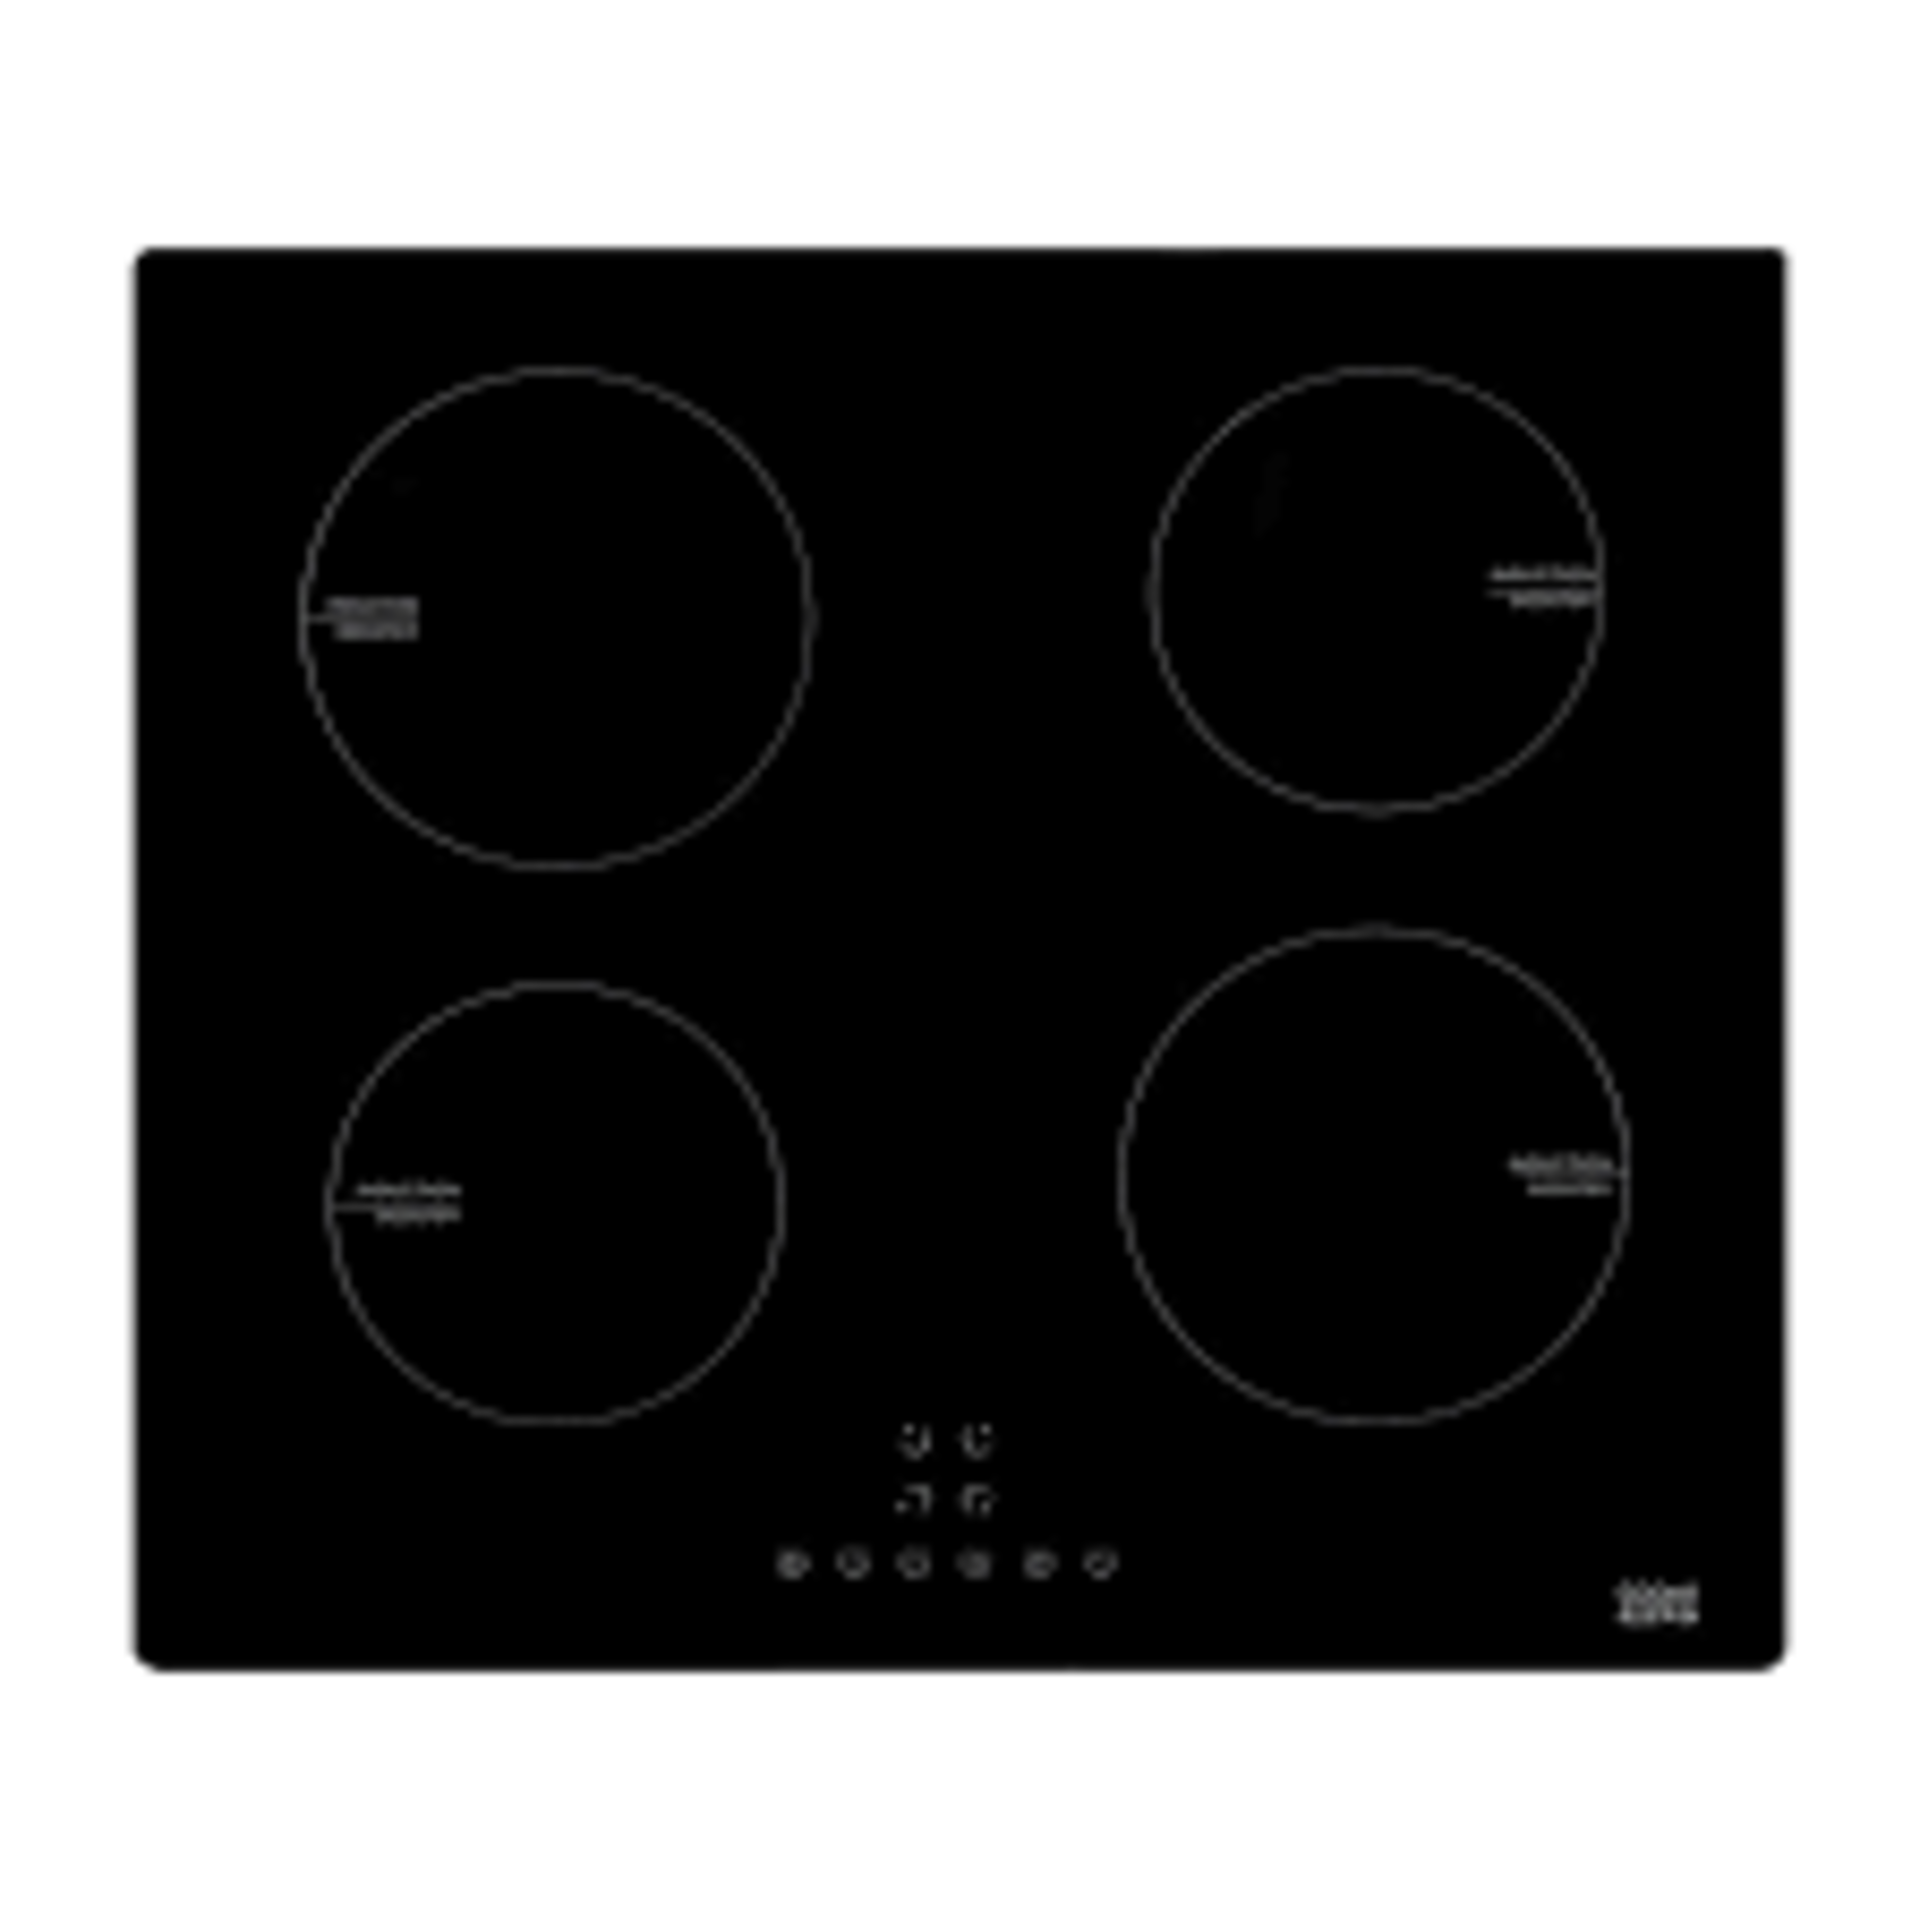 Cooke & Lewis CLIND60 59cm Induction Hob - Black. -ER47. This Glass induction hob is stylish and